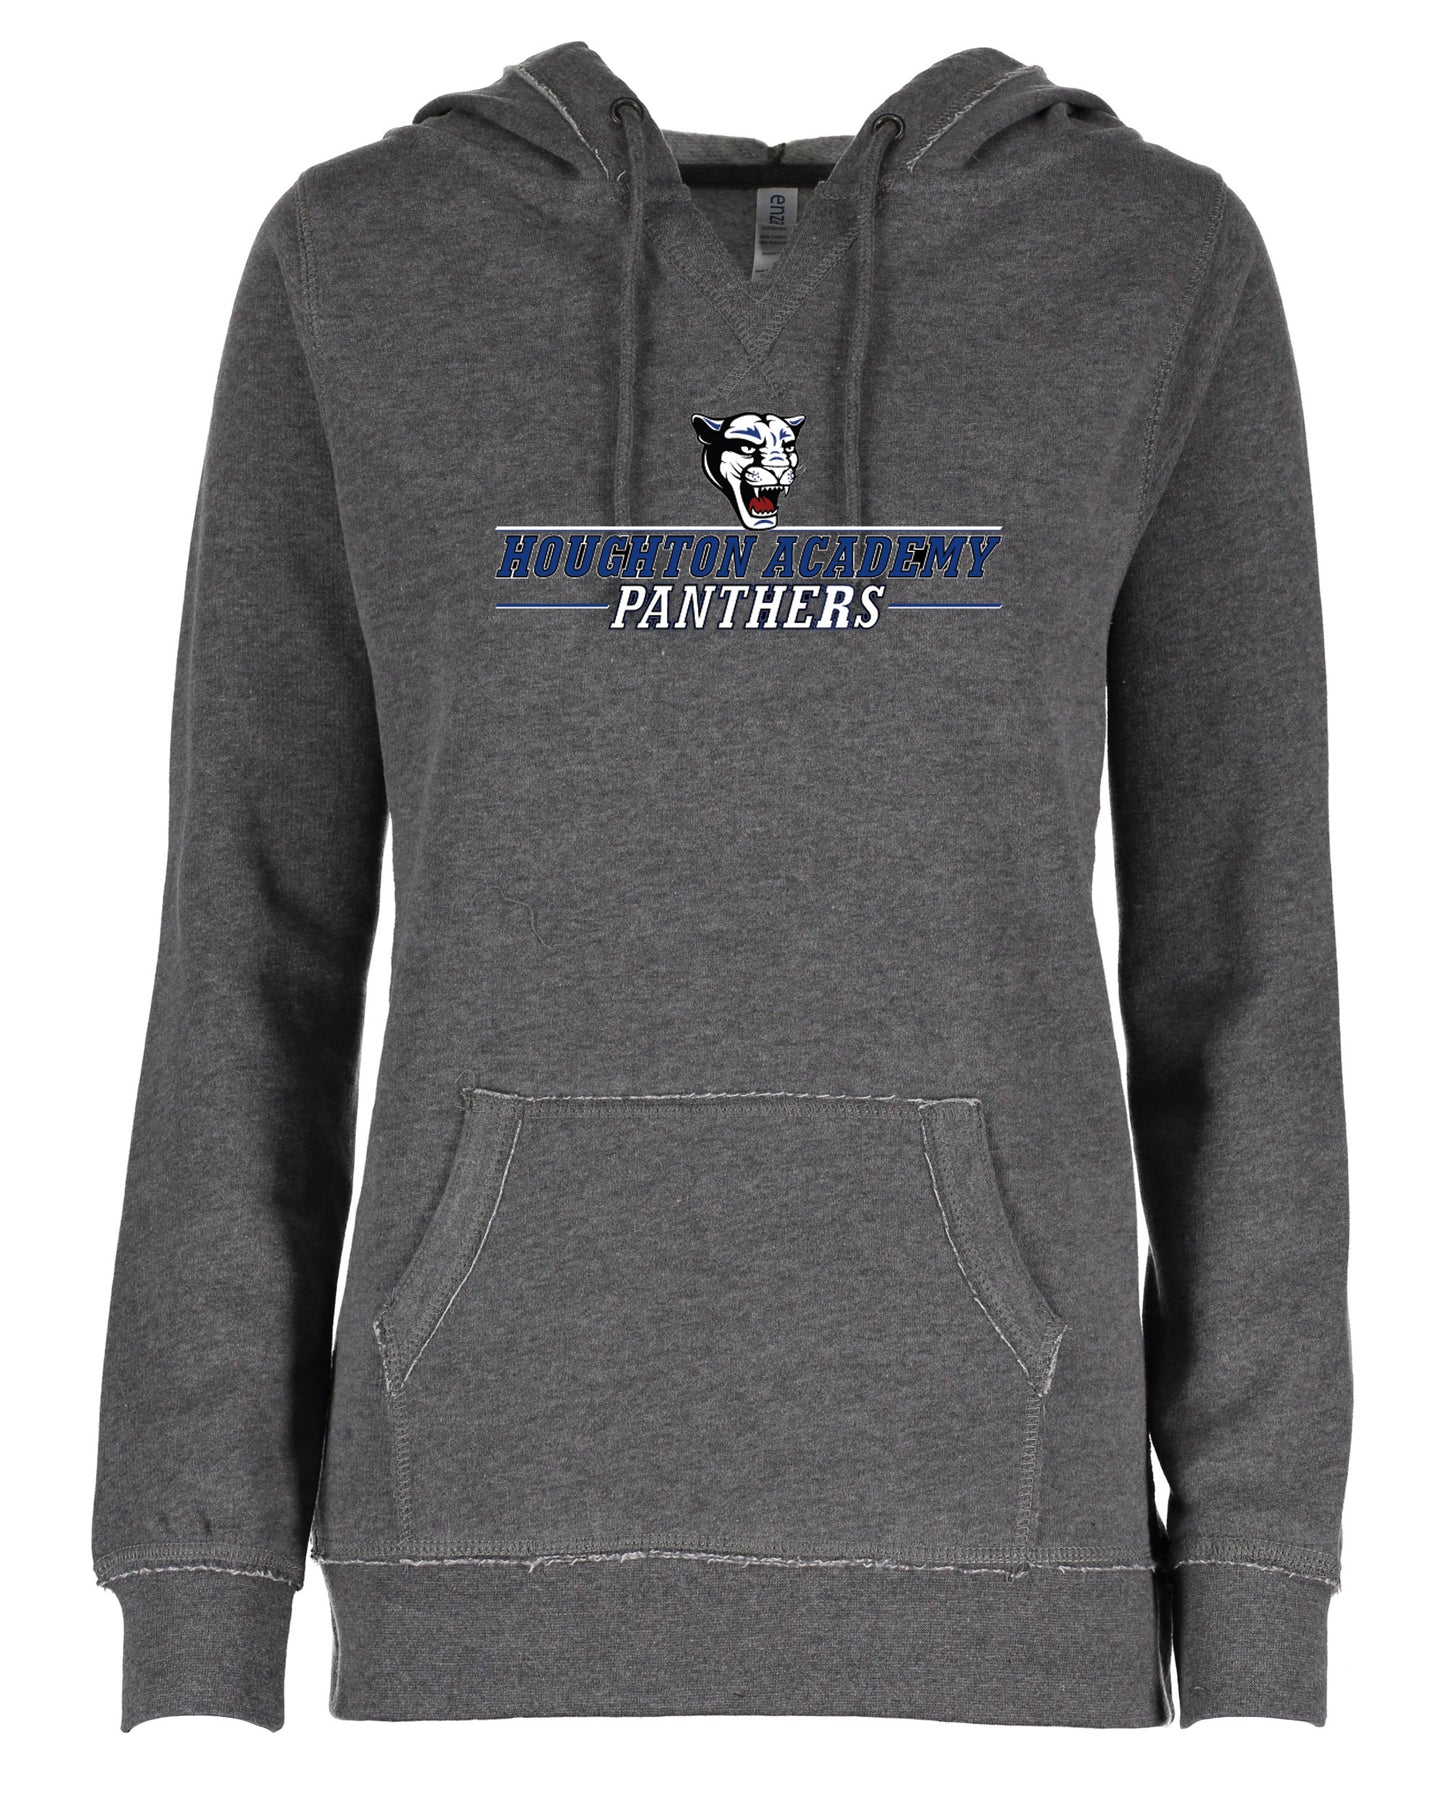 Houghton Academy (Panthers Logo) Ladies V-notch hoodie